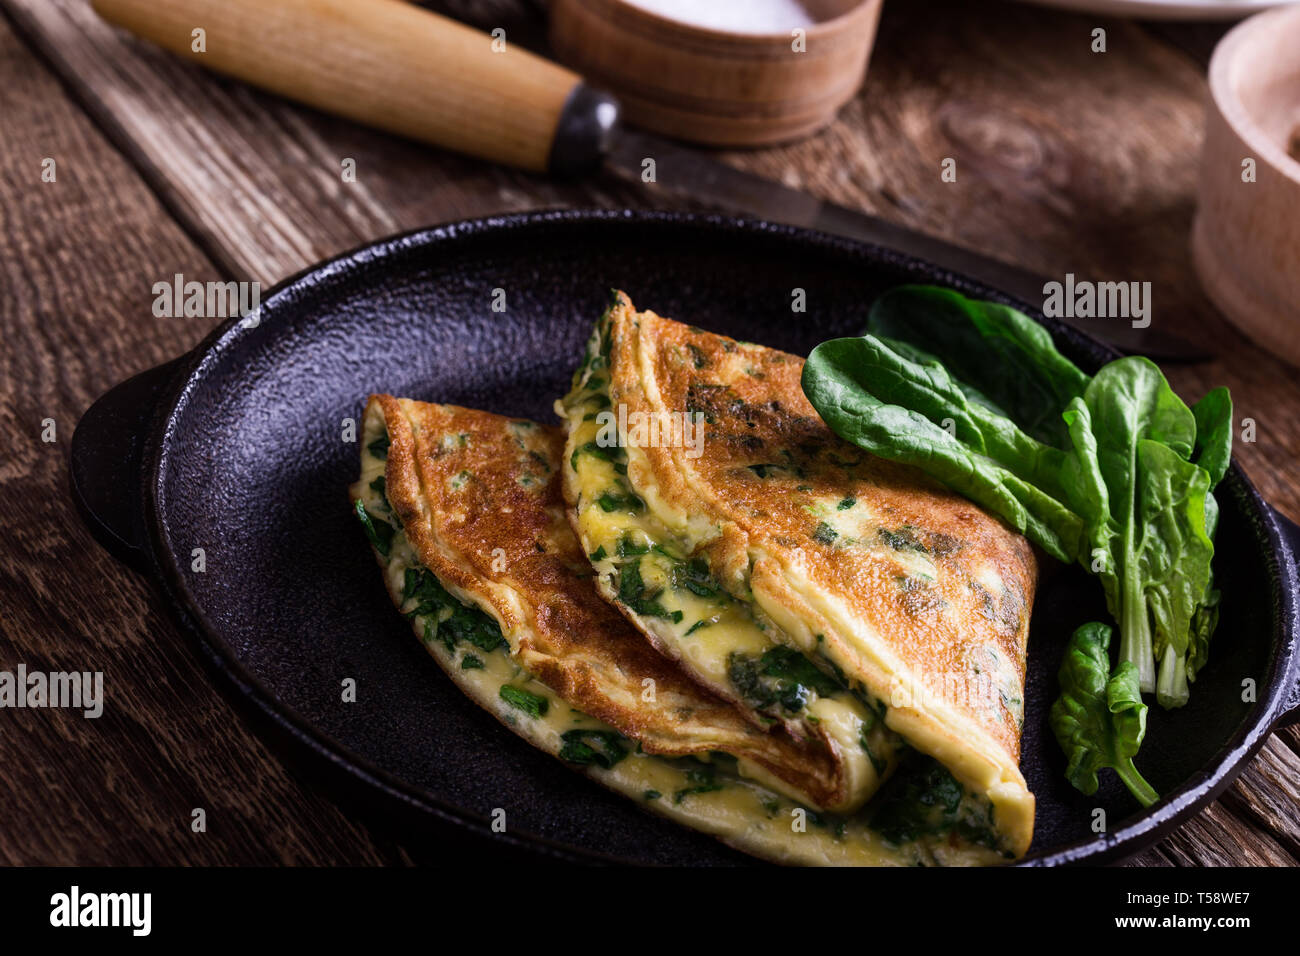 Spinach omelette in cast iron skillet, healthy vegetarian breakfast or brunch on wooden rustic table, close up, selective focus Stock Photo